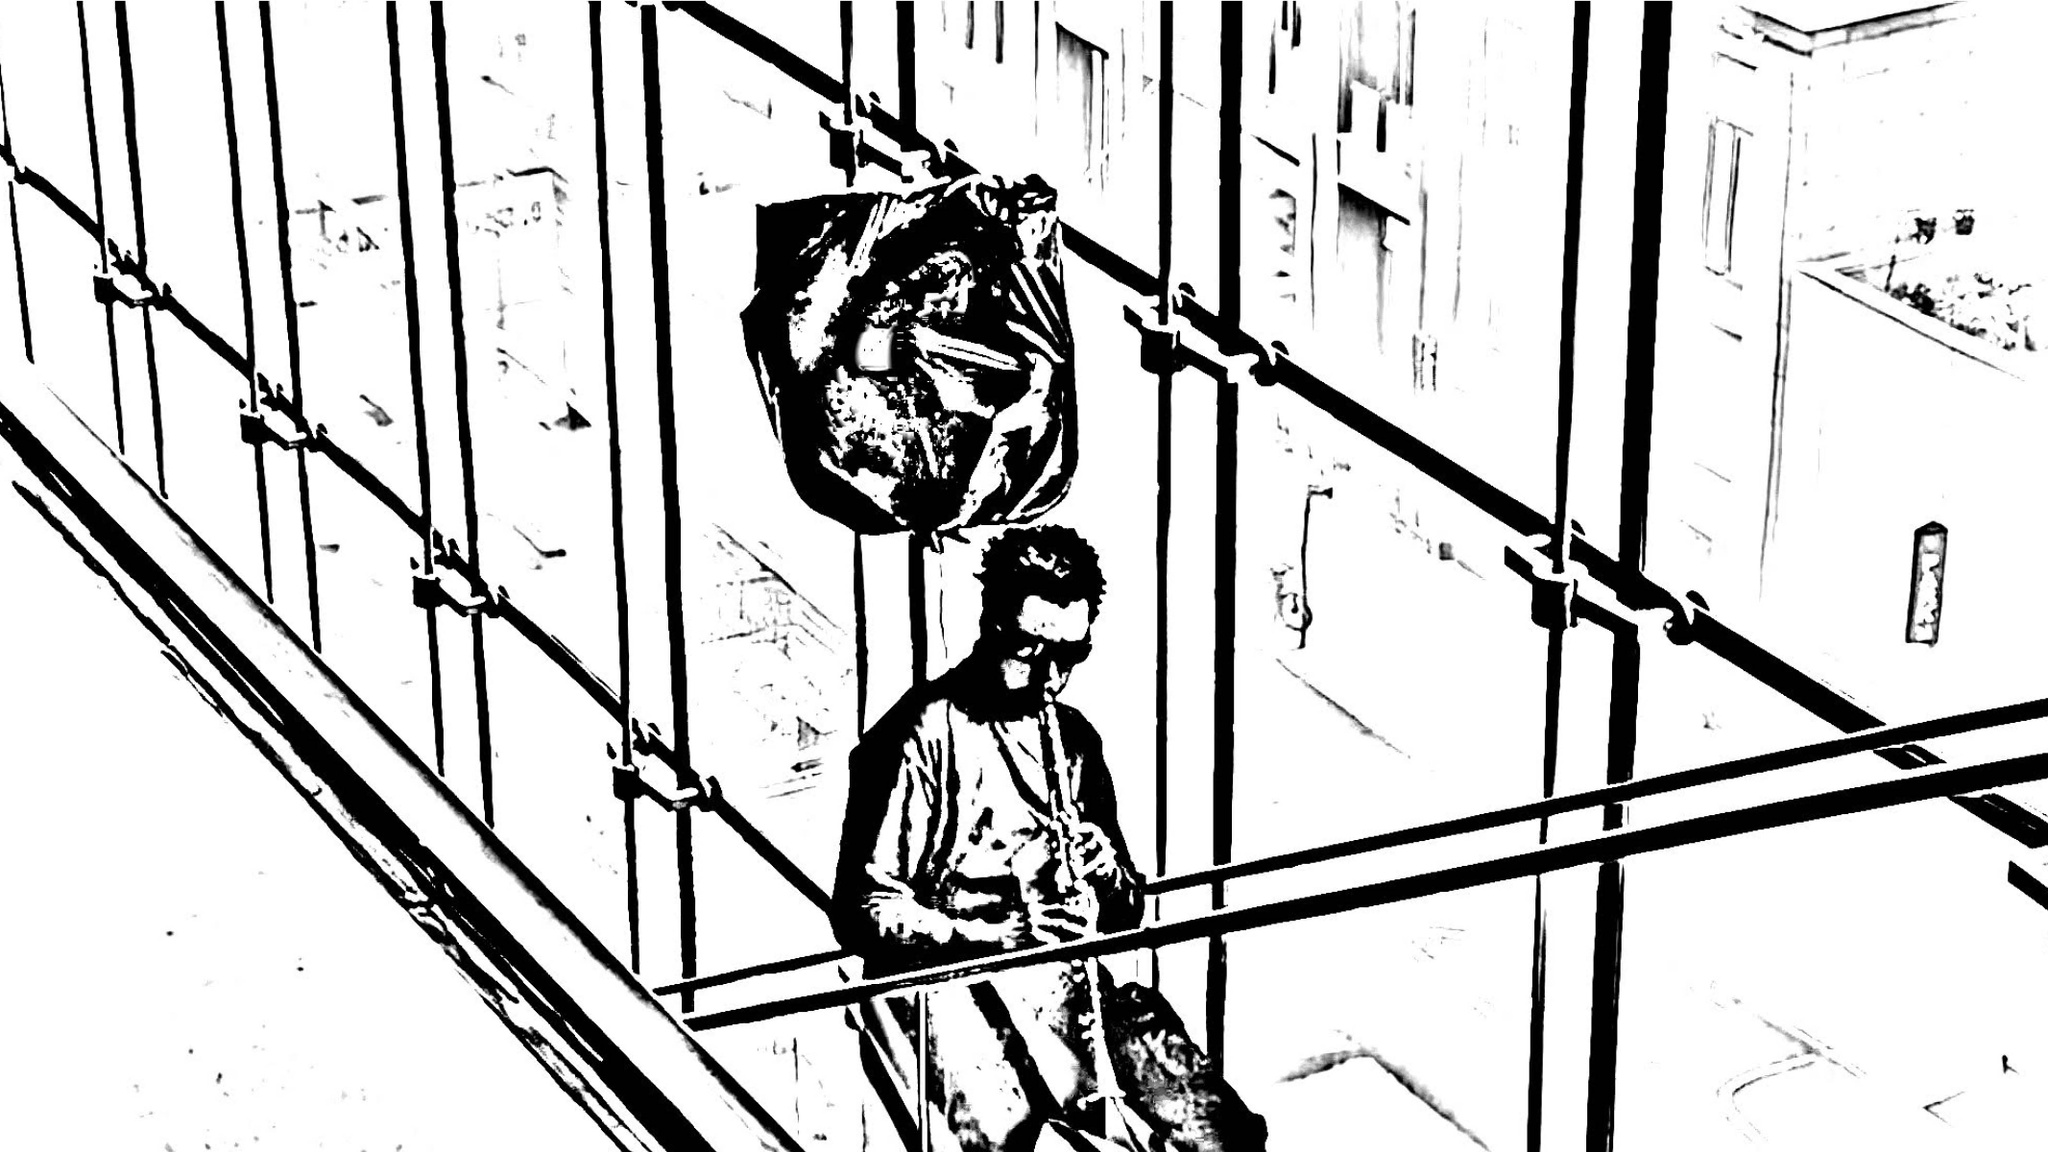 A manipulated photo digitally edited to look like a black and white line drawing. In the image, a person is seen from above riding an escalator playing a clarinet.